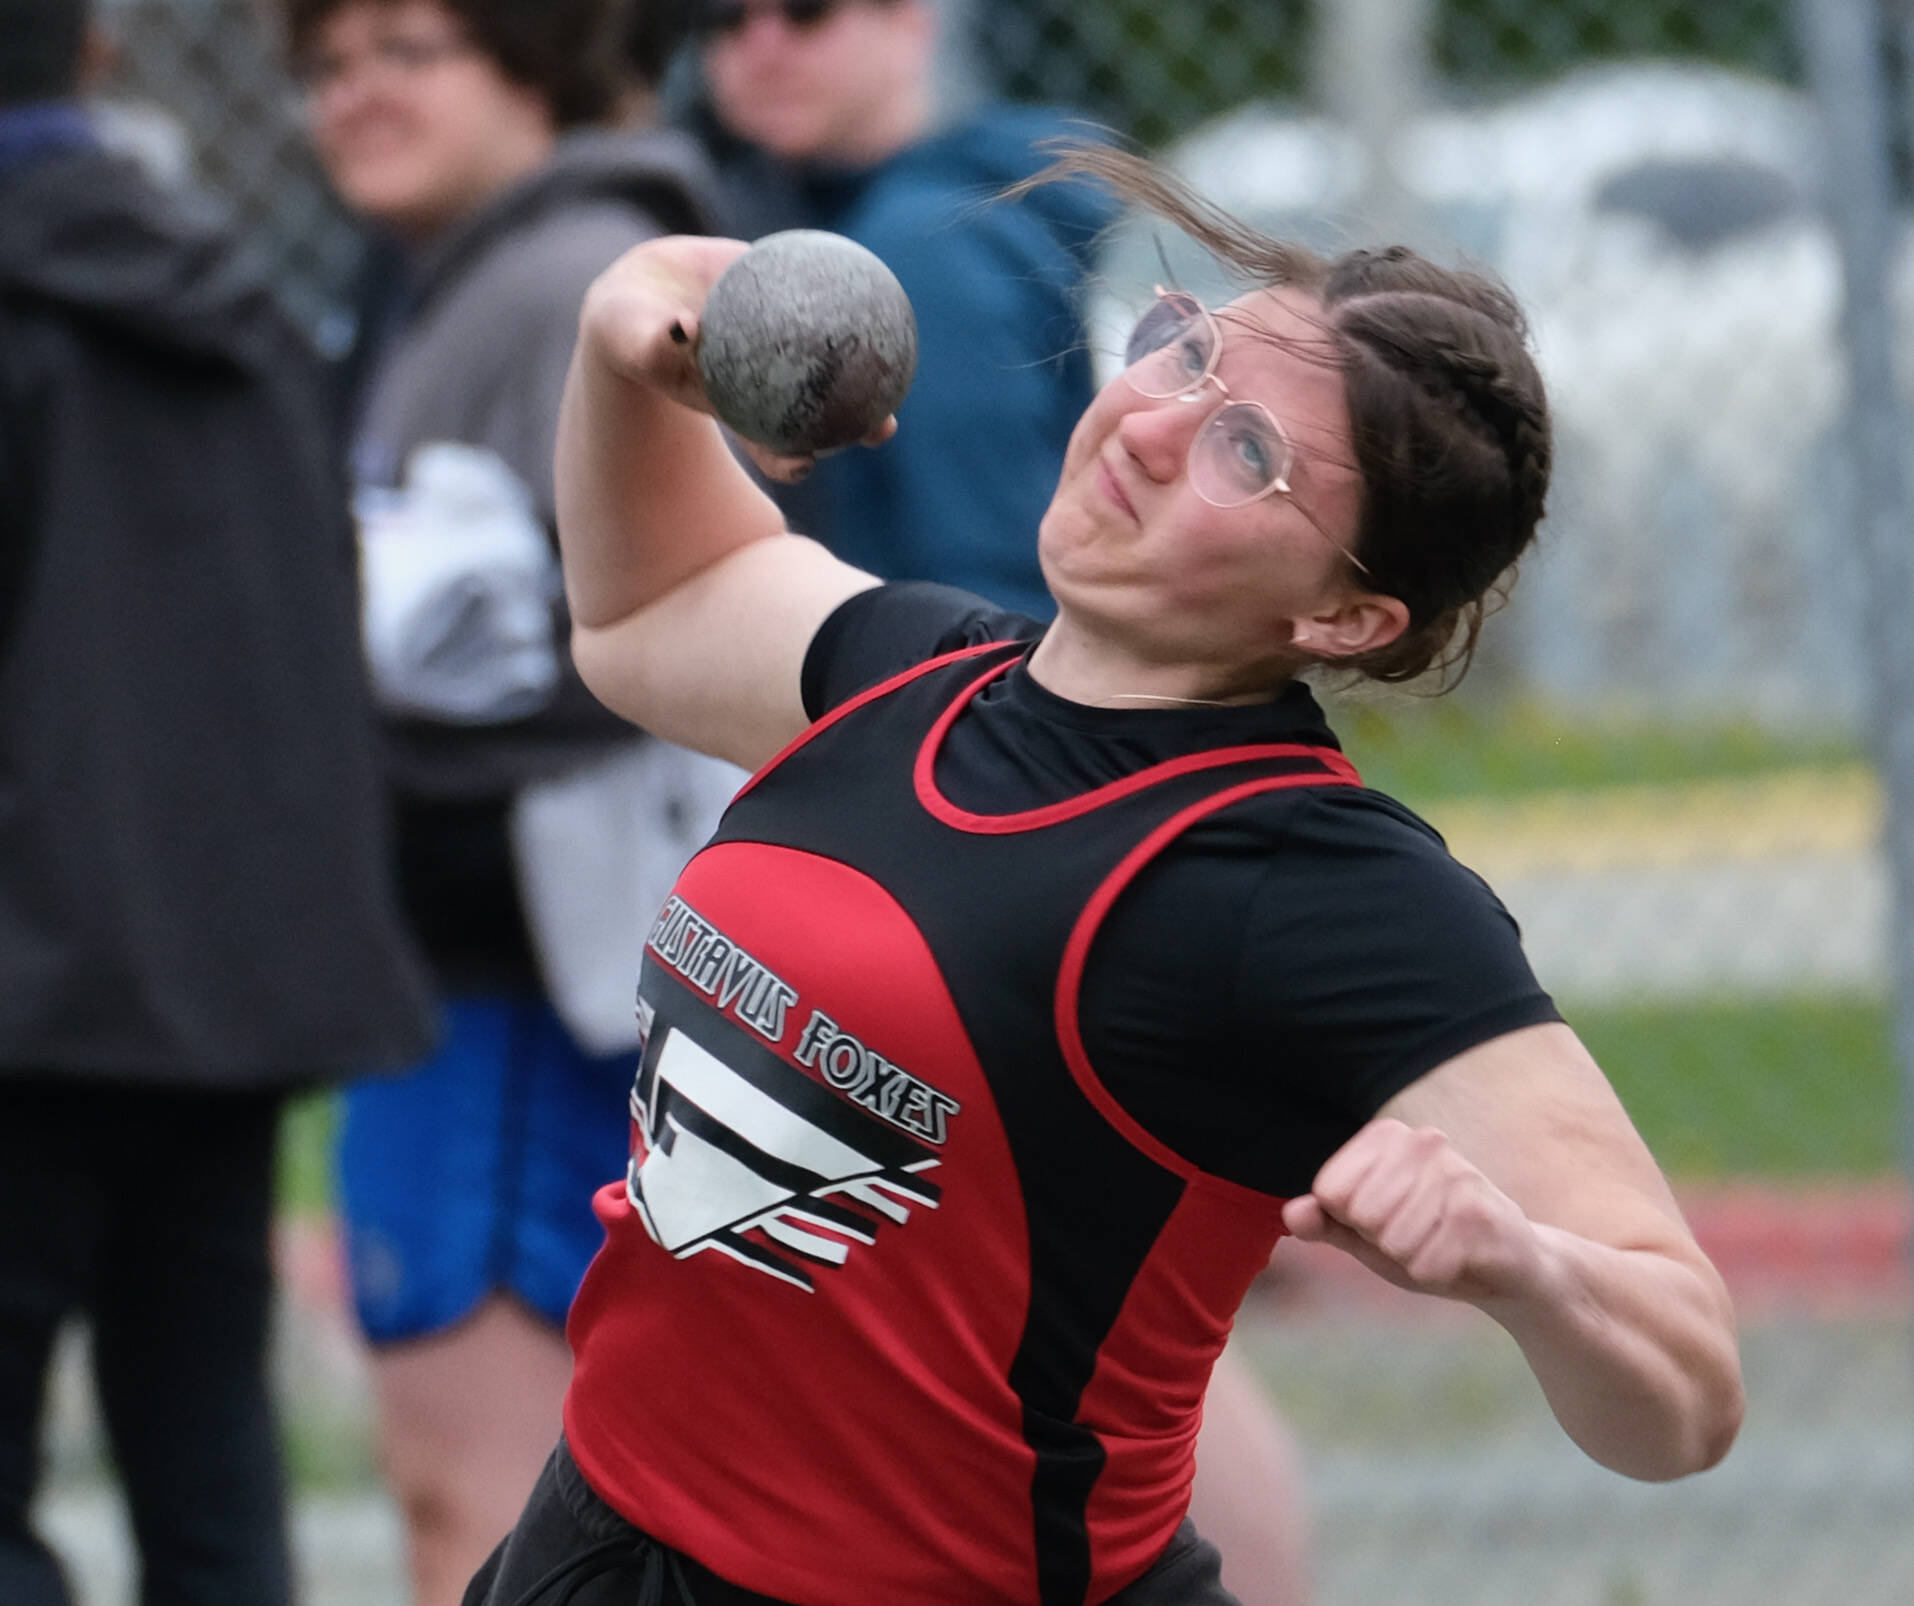 Gustavus junior Madeline Wagner wins the DII shot put during the Region V Track & Field Championships, Friday, at Thunder Mountain. The championships resume Saturday. (Klas Stolpe / Juneau Empire)